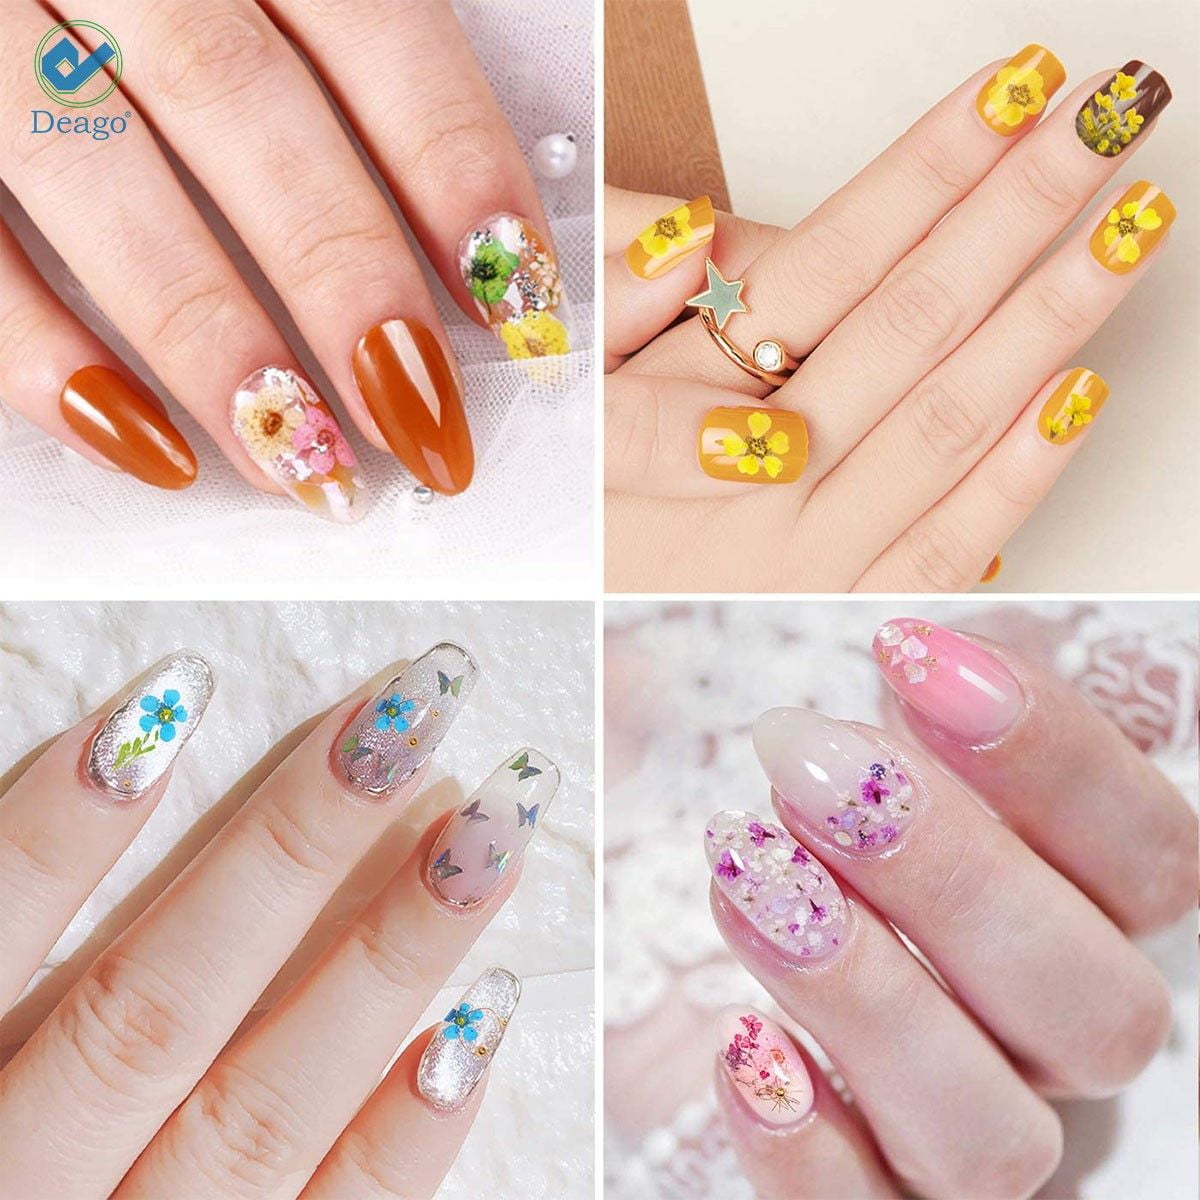 2 Boxes Nail Art Dried Flowers,UNIME 24 Colors Dry Flowers Mini Real  Natural Flowers Nail Art Supplies 3D Applique Nail Decoration Sticker for  Tips